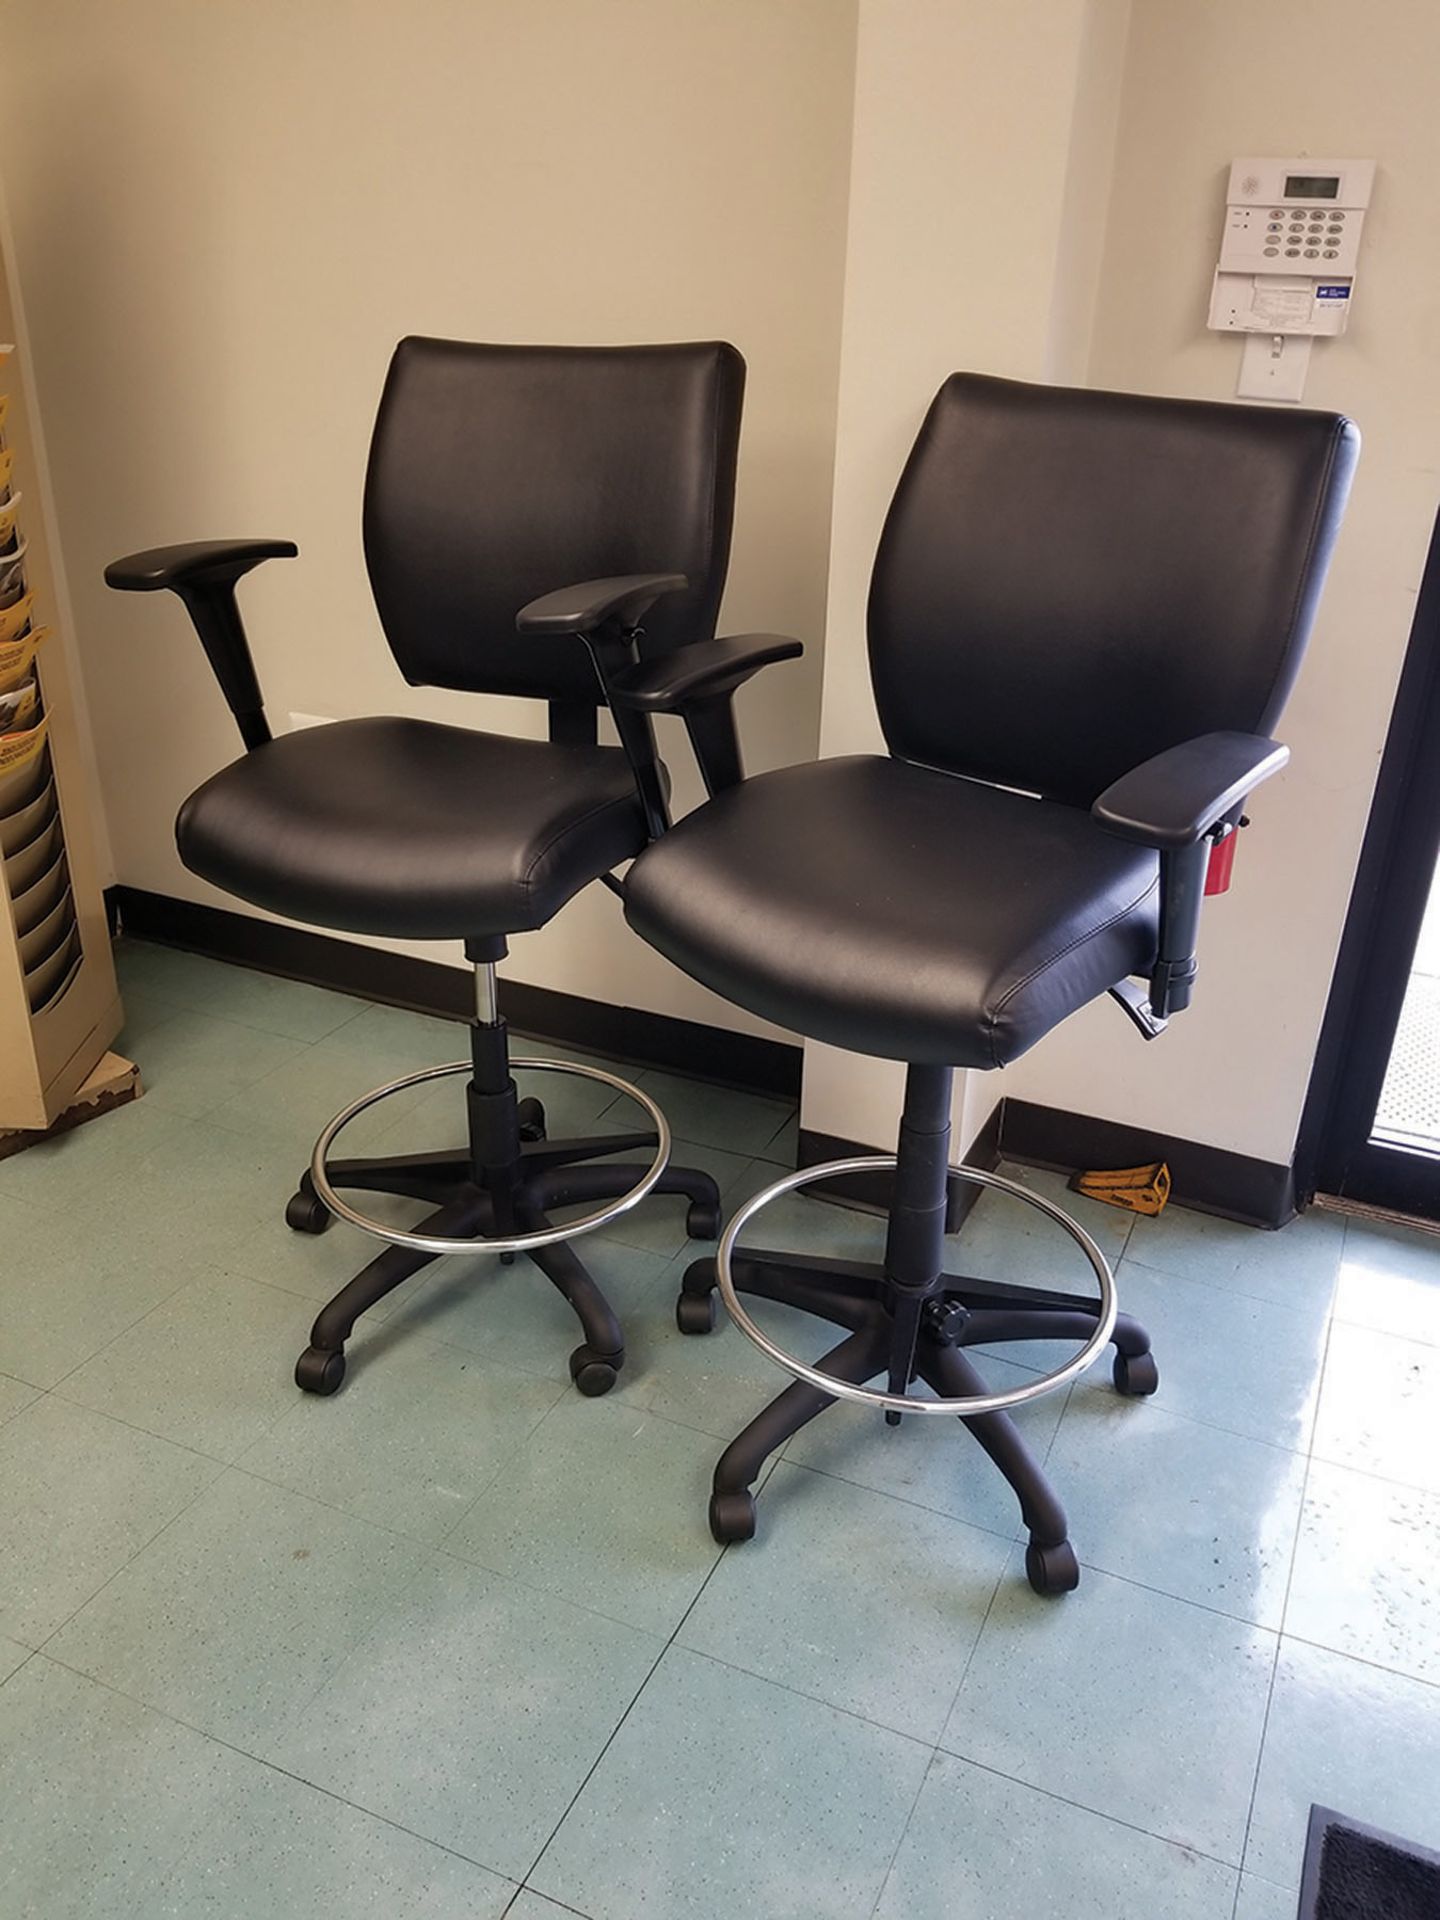 (2) BLACK TALL OFFICE/RECEPTION LEATHER CHAIRS ***LOCATED AT TOM'S RIVER, NJ***